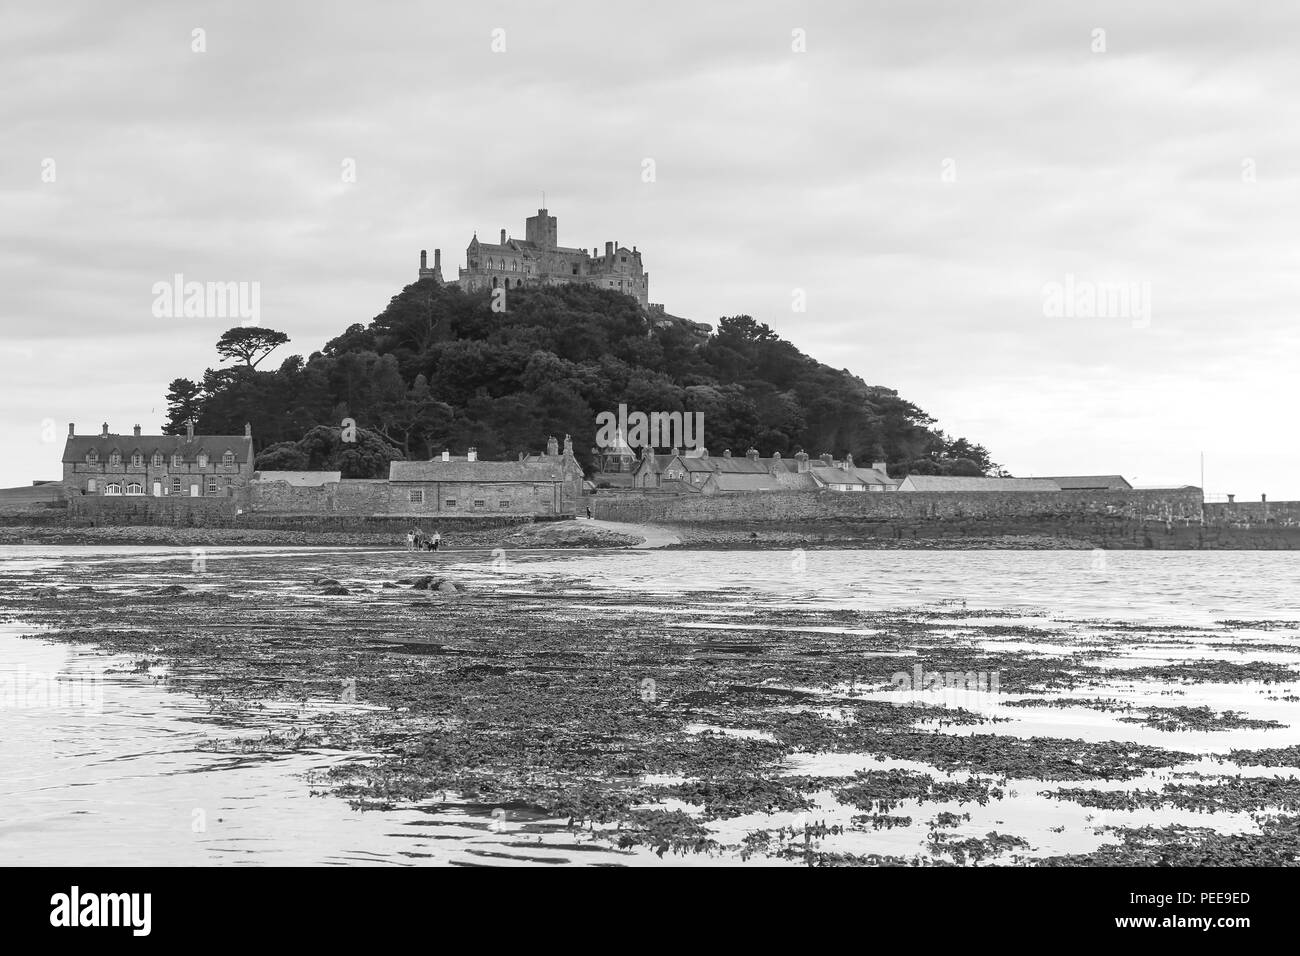 St. Michael's Mount castle is located on the top of an granitic-rock island near Marazion, Cornwall, England. At low tide you can walk to the island. Stock Photo